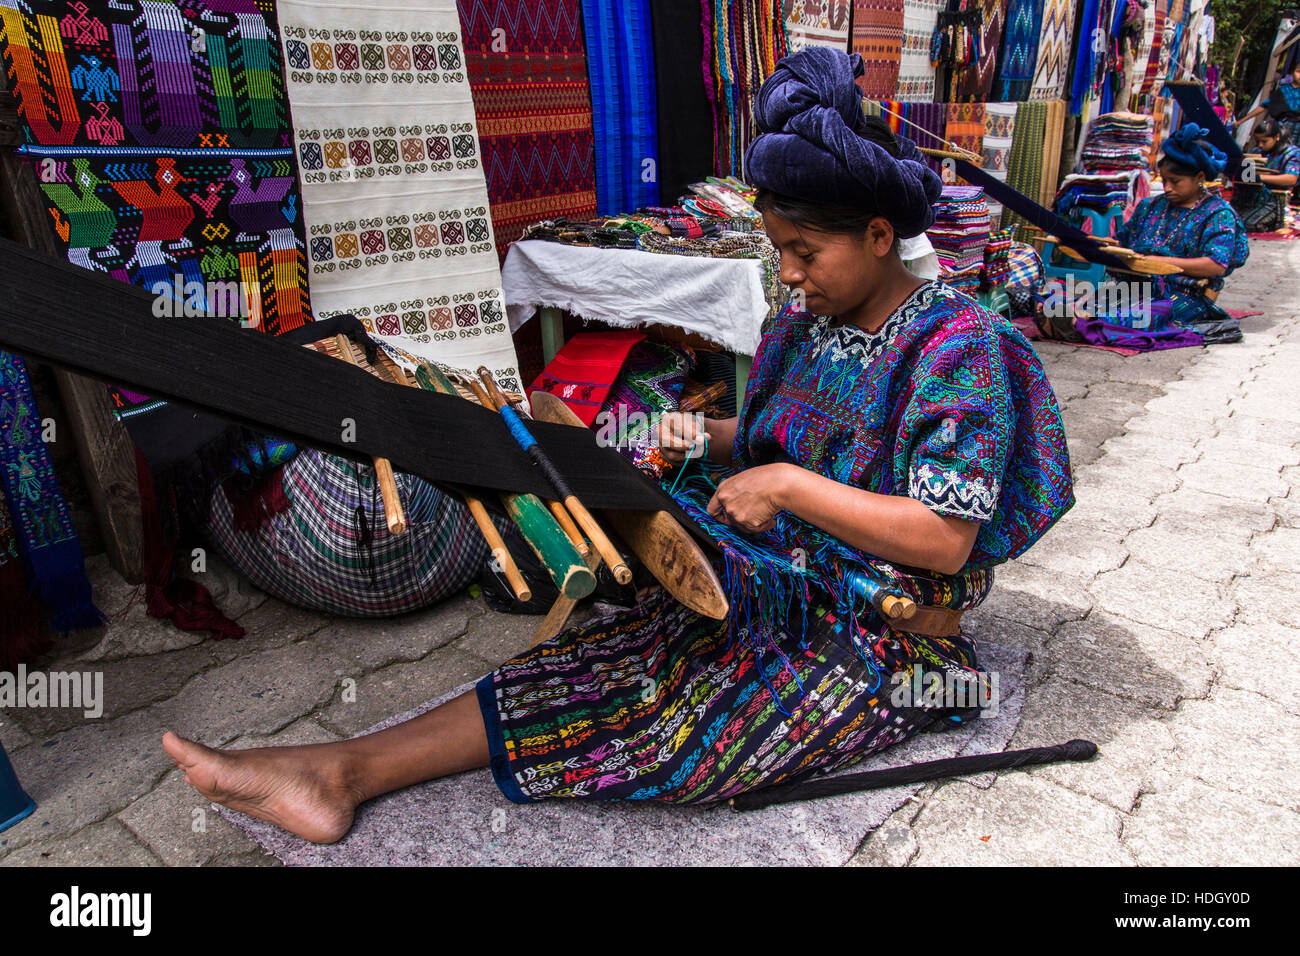 Mayan women sitting on the ground and weaving on backstrap looms in traditional dress in Santa Catarina Palopo, Guatemala. Stock Photo